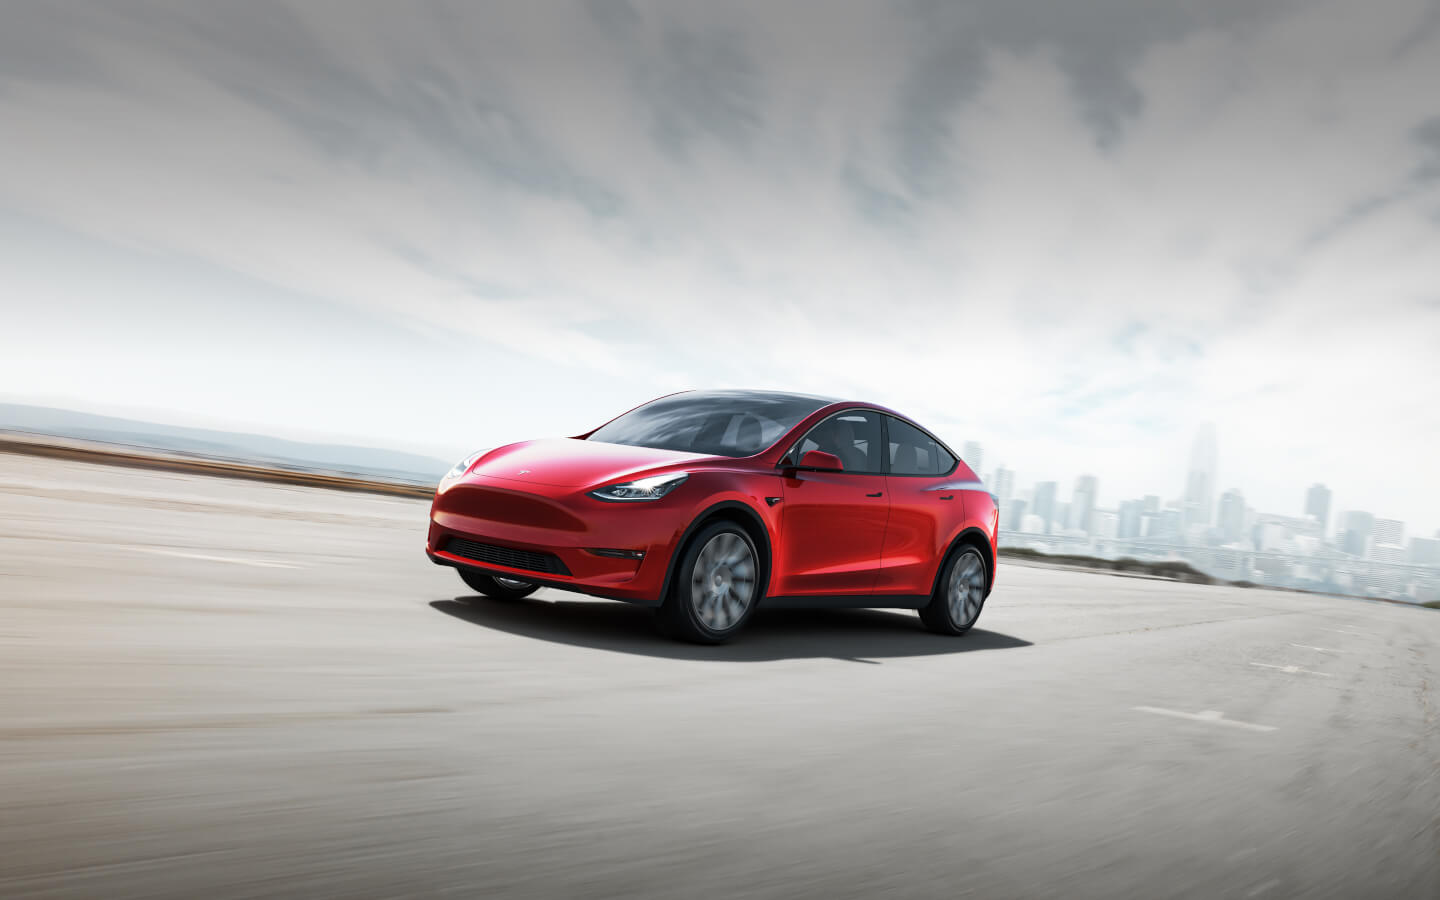 Tesla's new Model Y crossover starts at $39,000, has a lot in common with the Model 3